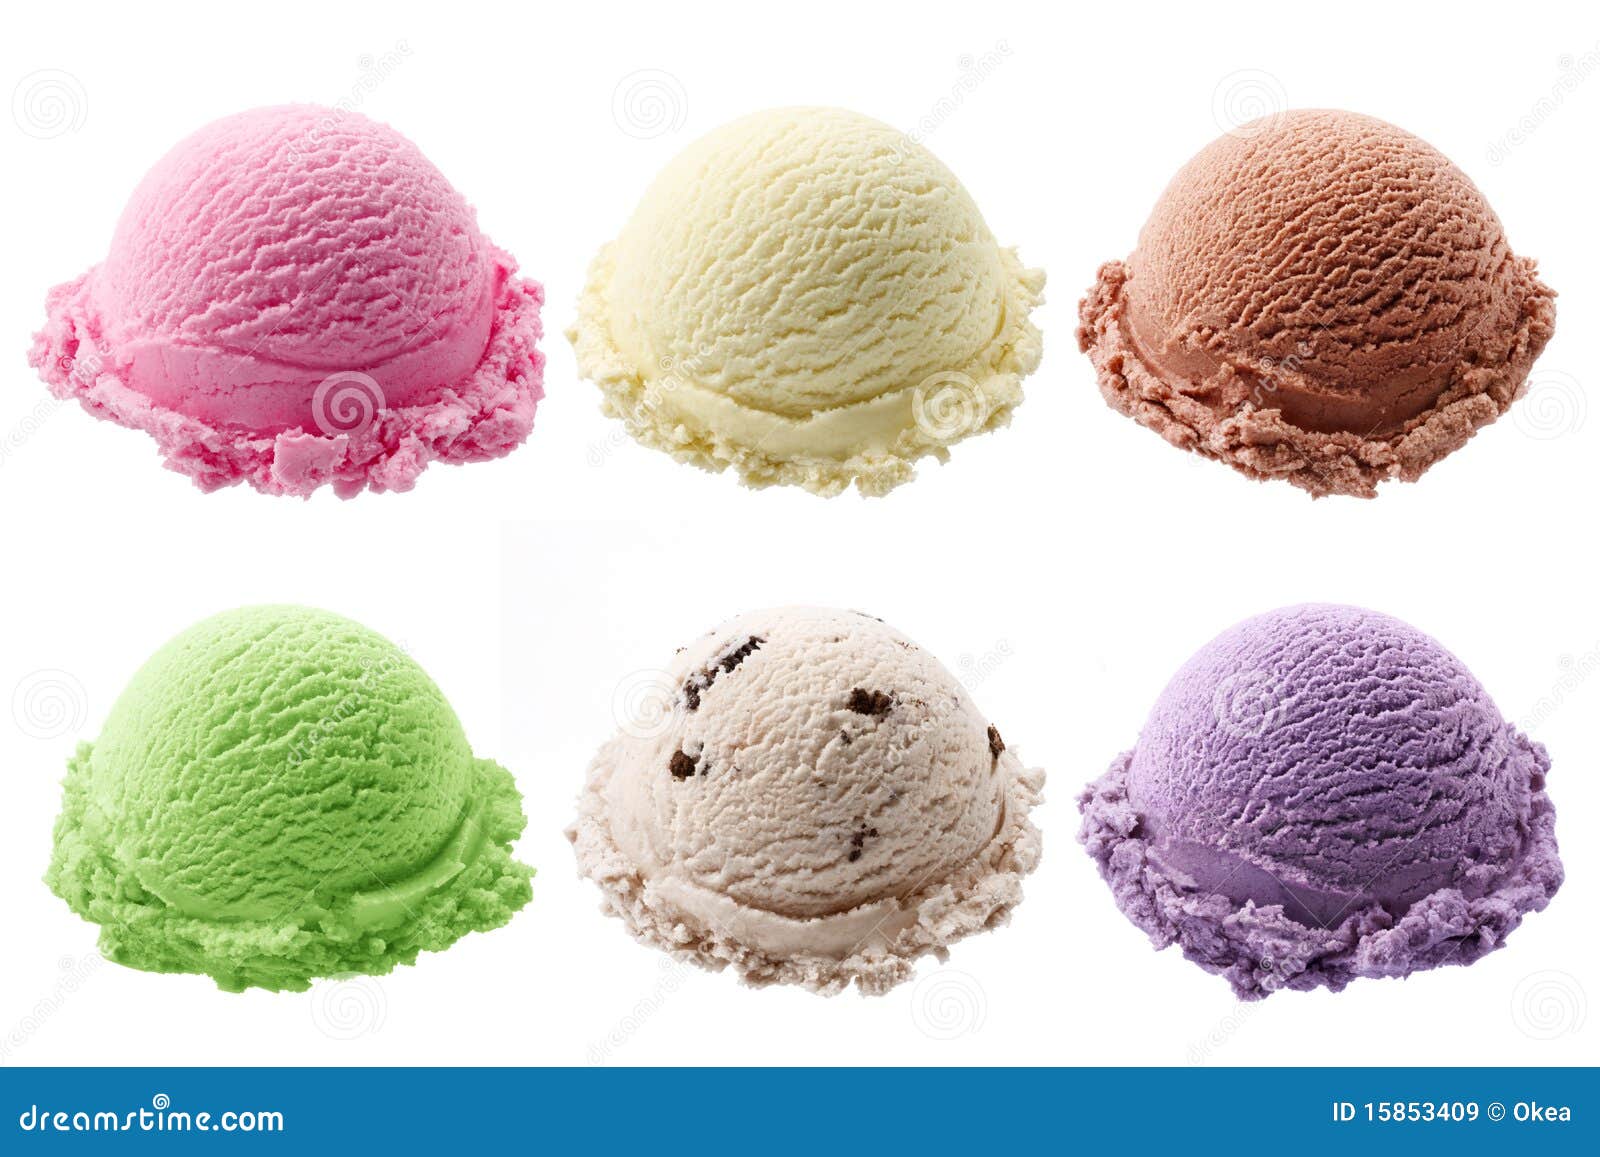 Scoops of ice cream stock image. Image of scoop, food - 15853409